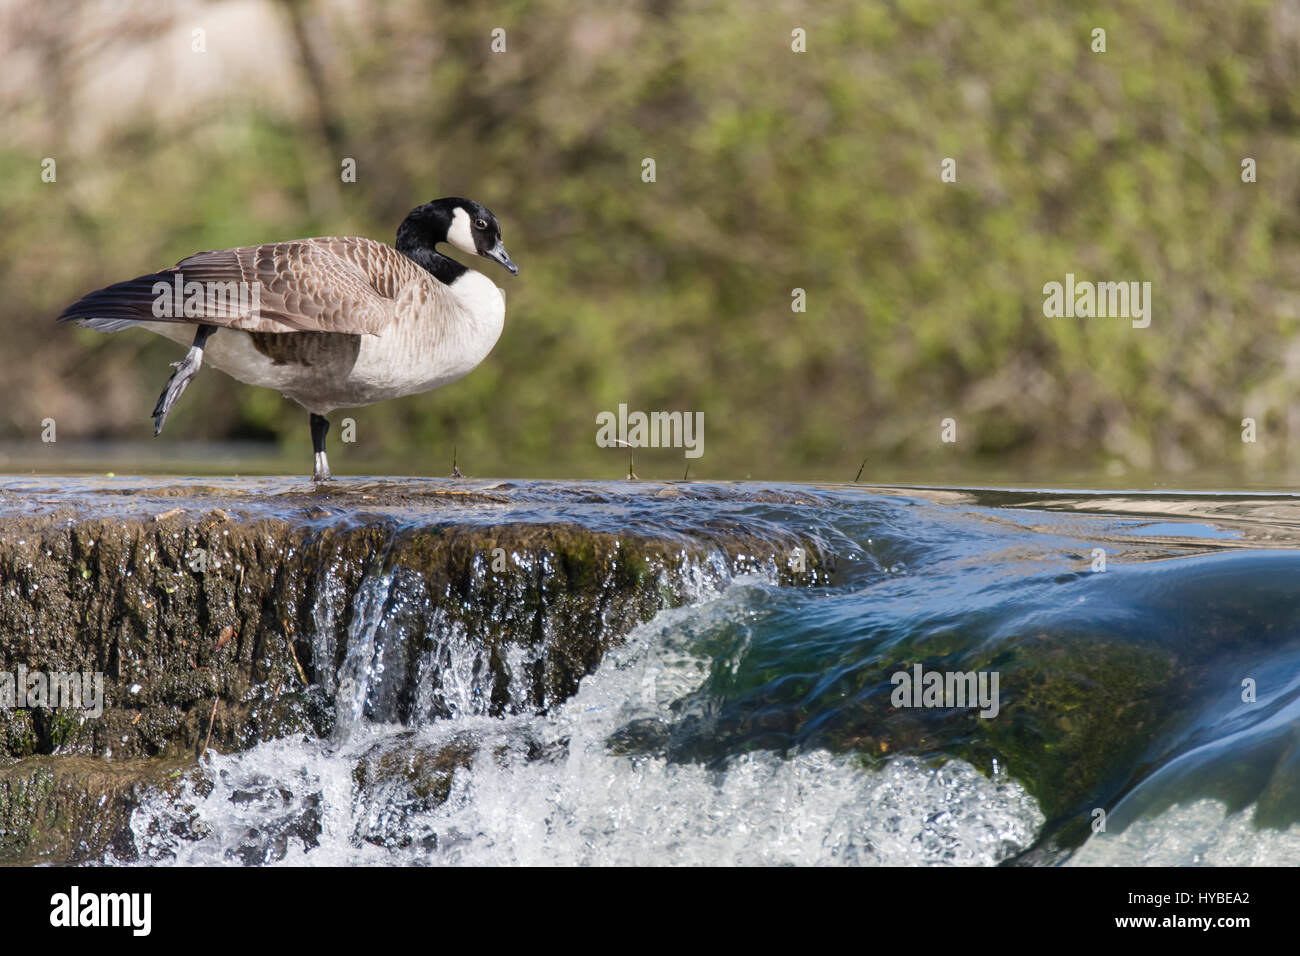 Canada goose (Branta canadensis) standing on waterfall. Large black and white bird in the family Anatidae resting atop of water flowing over weir Stock Photo